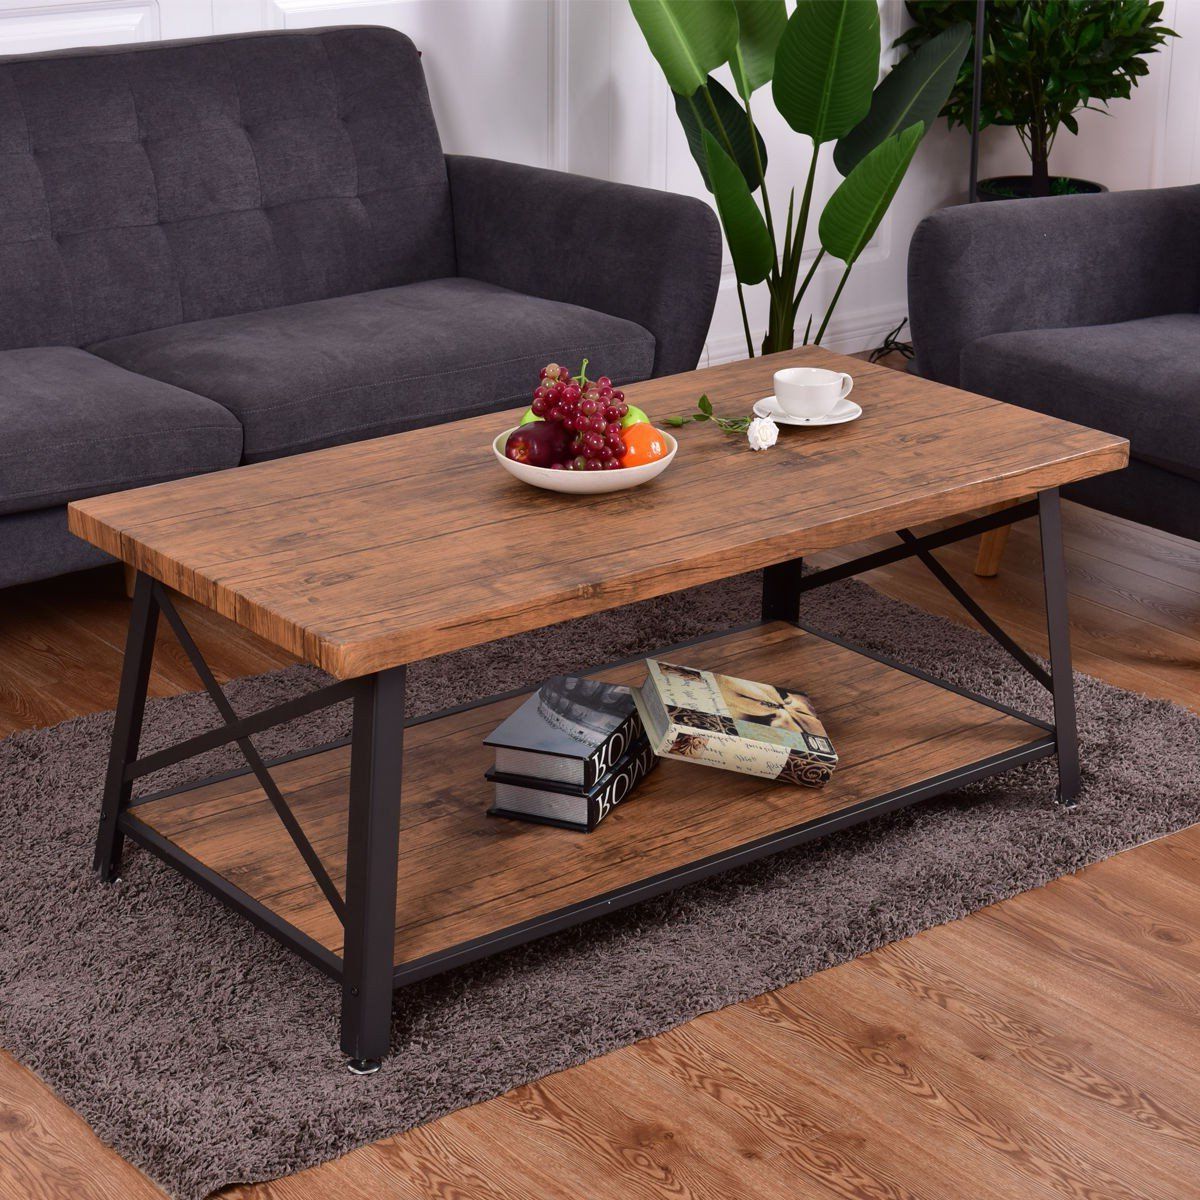 Rectangular Metal Frame Wood Coffee Table With Storage Shelf | Coffee In Metal 1 Shelf Coffee Tables (View 9 of 20)